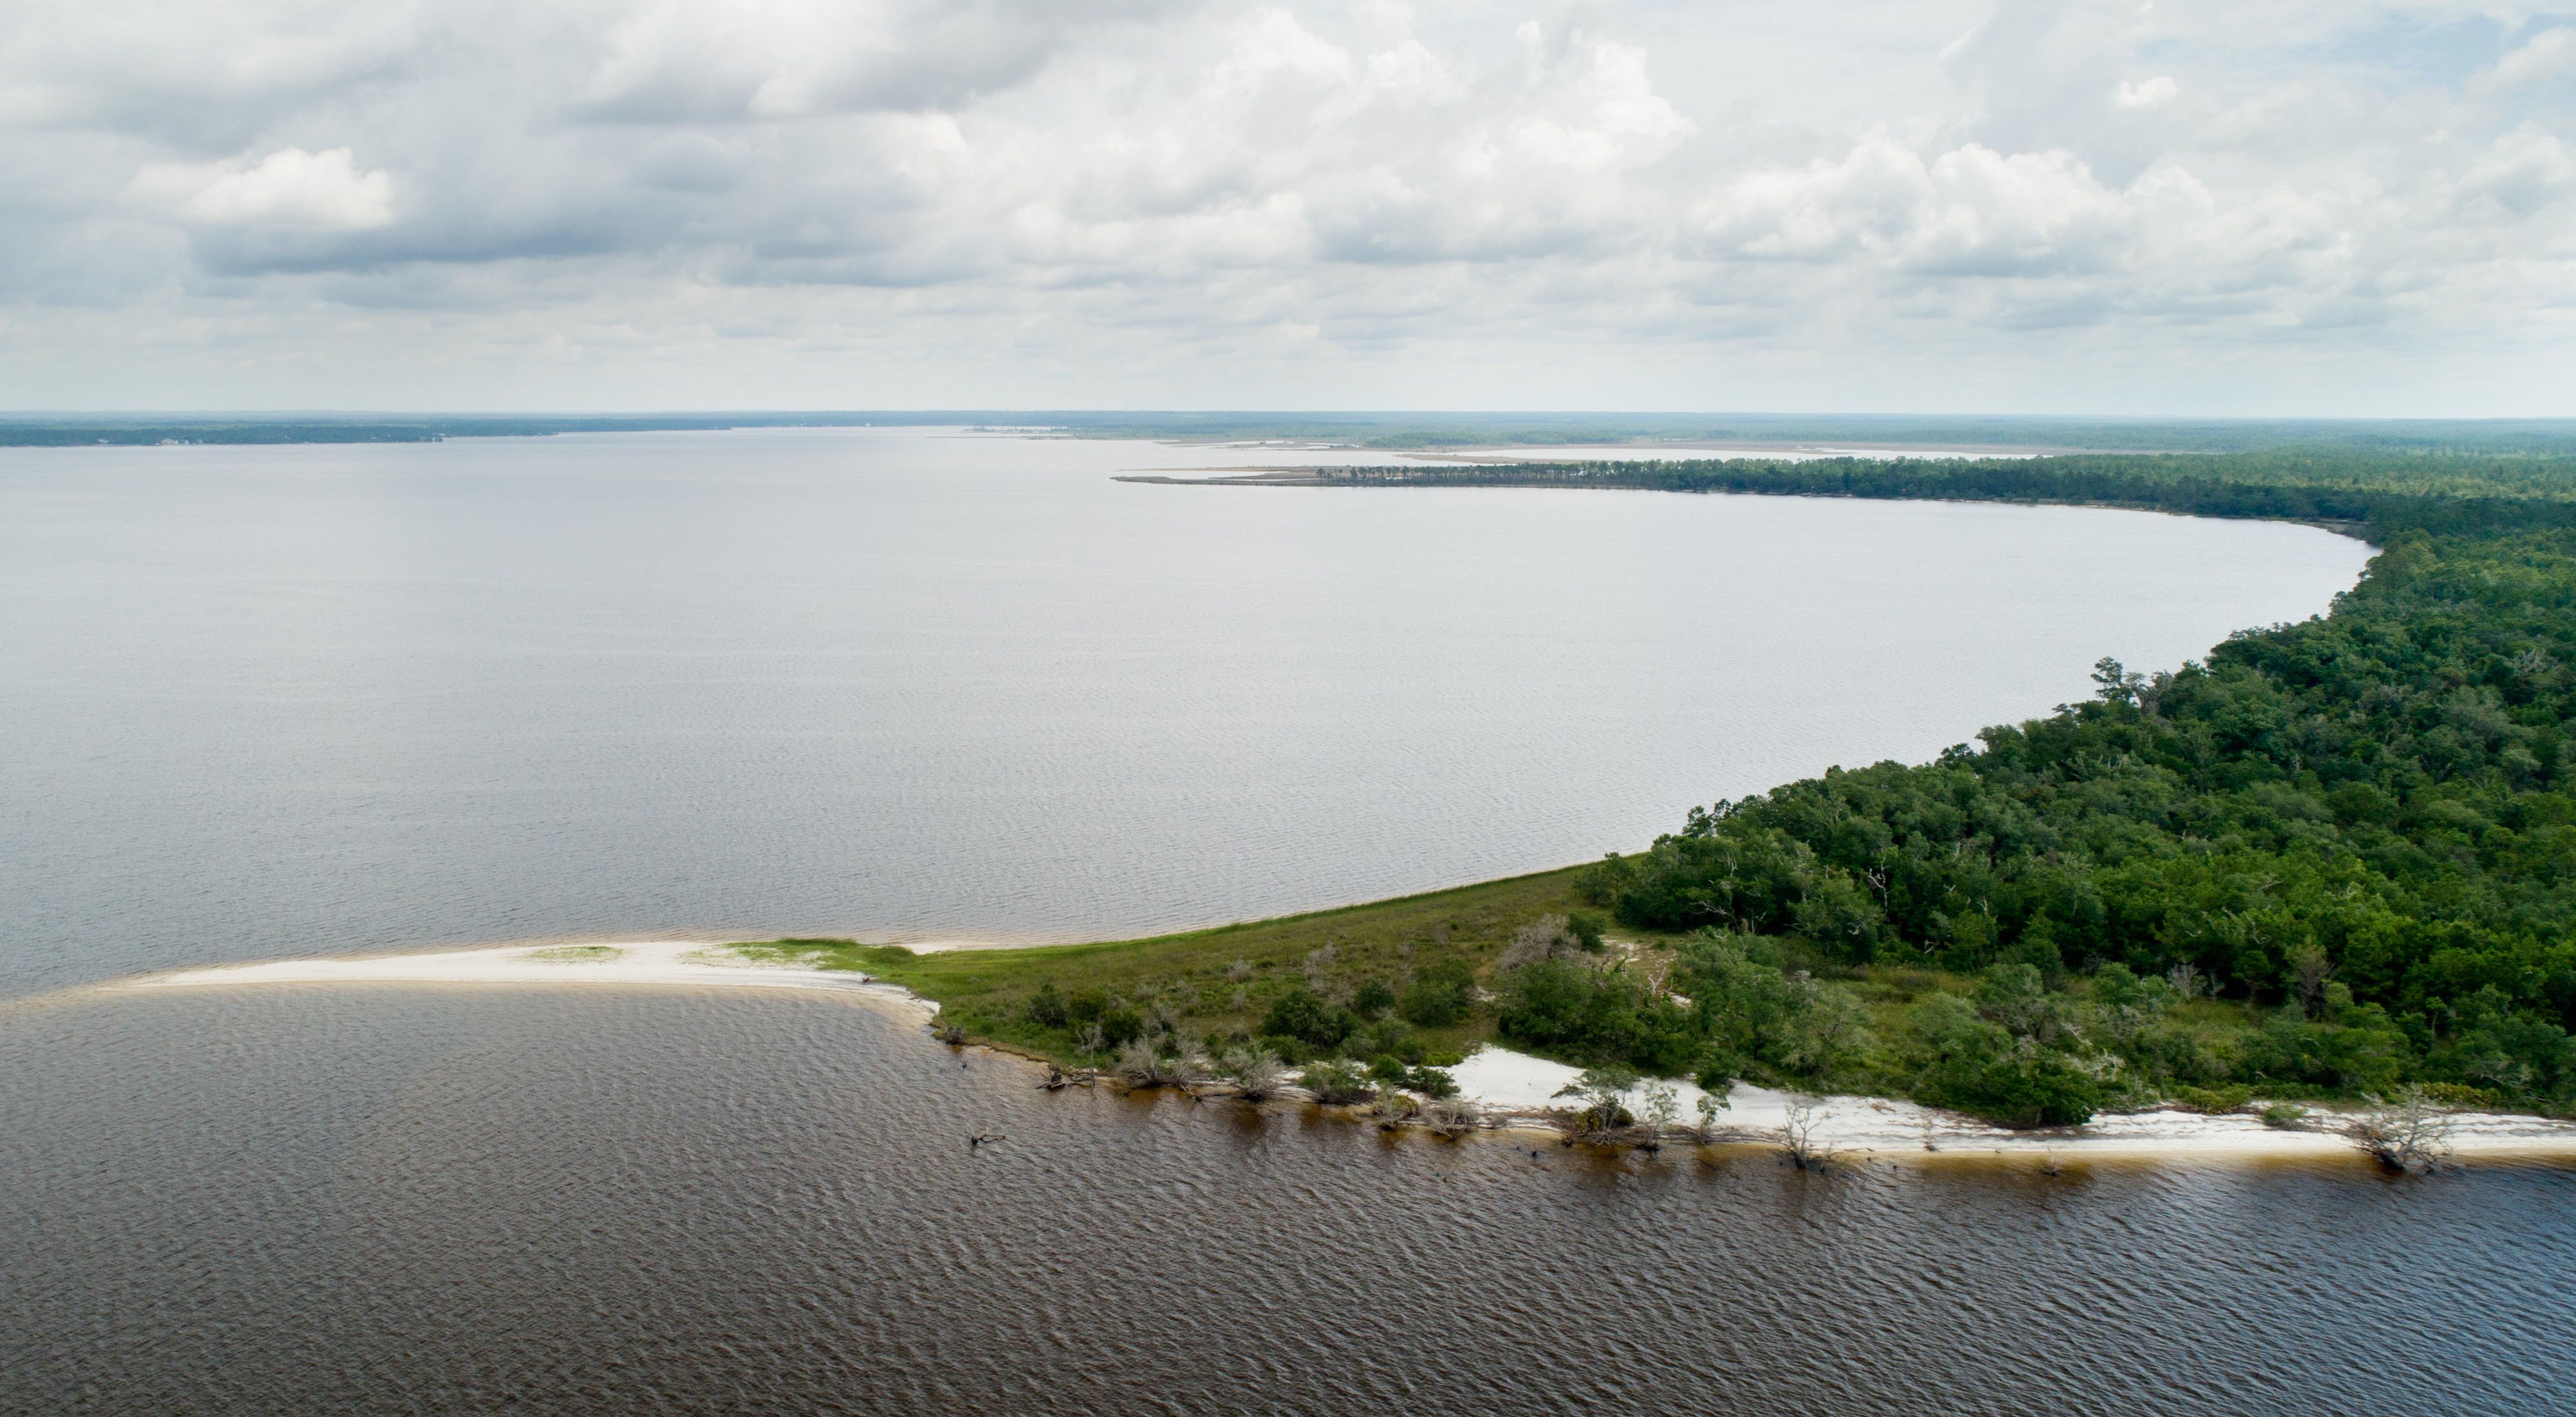 Scenic aerial landscape of the Pensacola Perdido Watershed bay area with bay water and green forested shoreline.